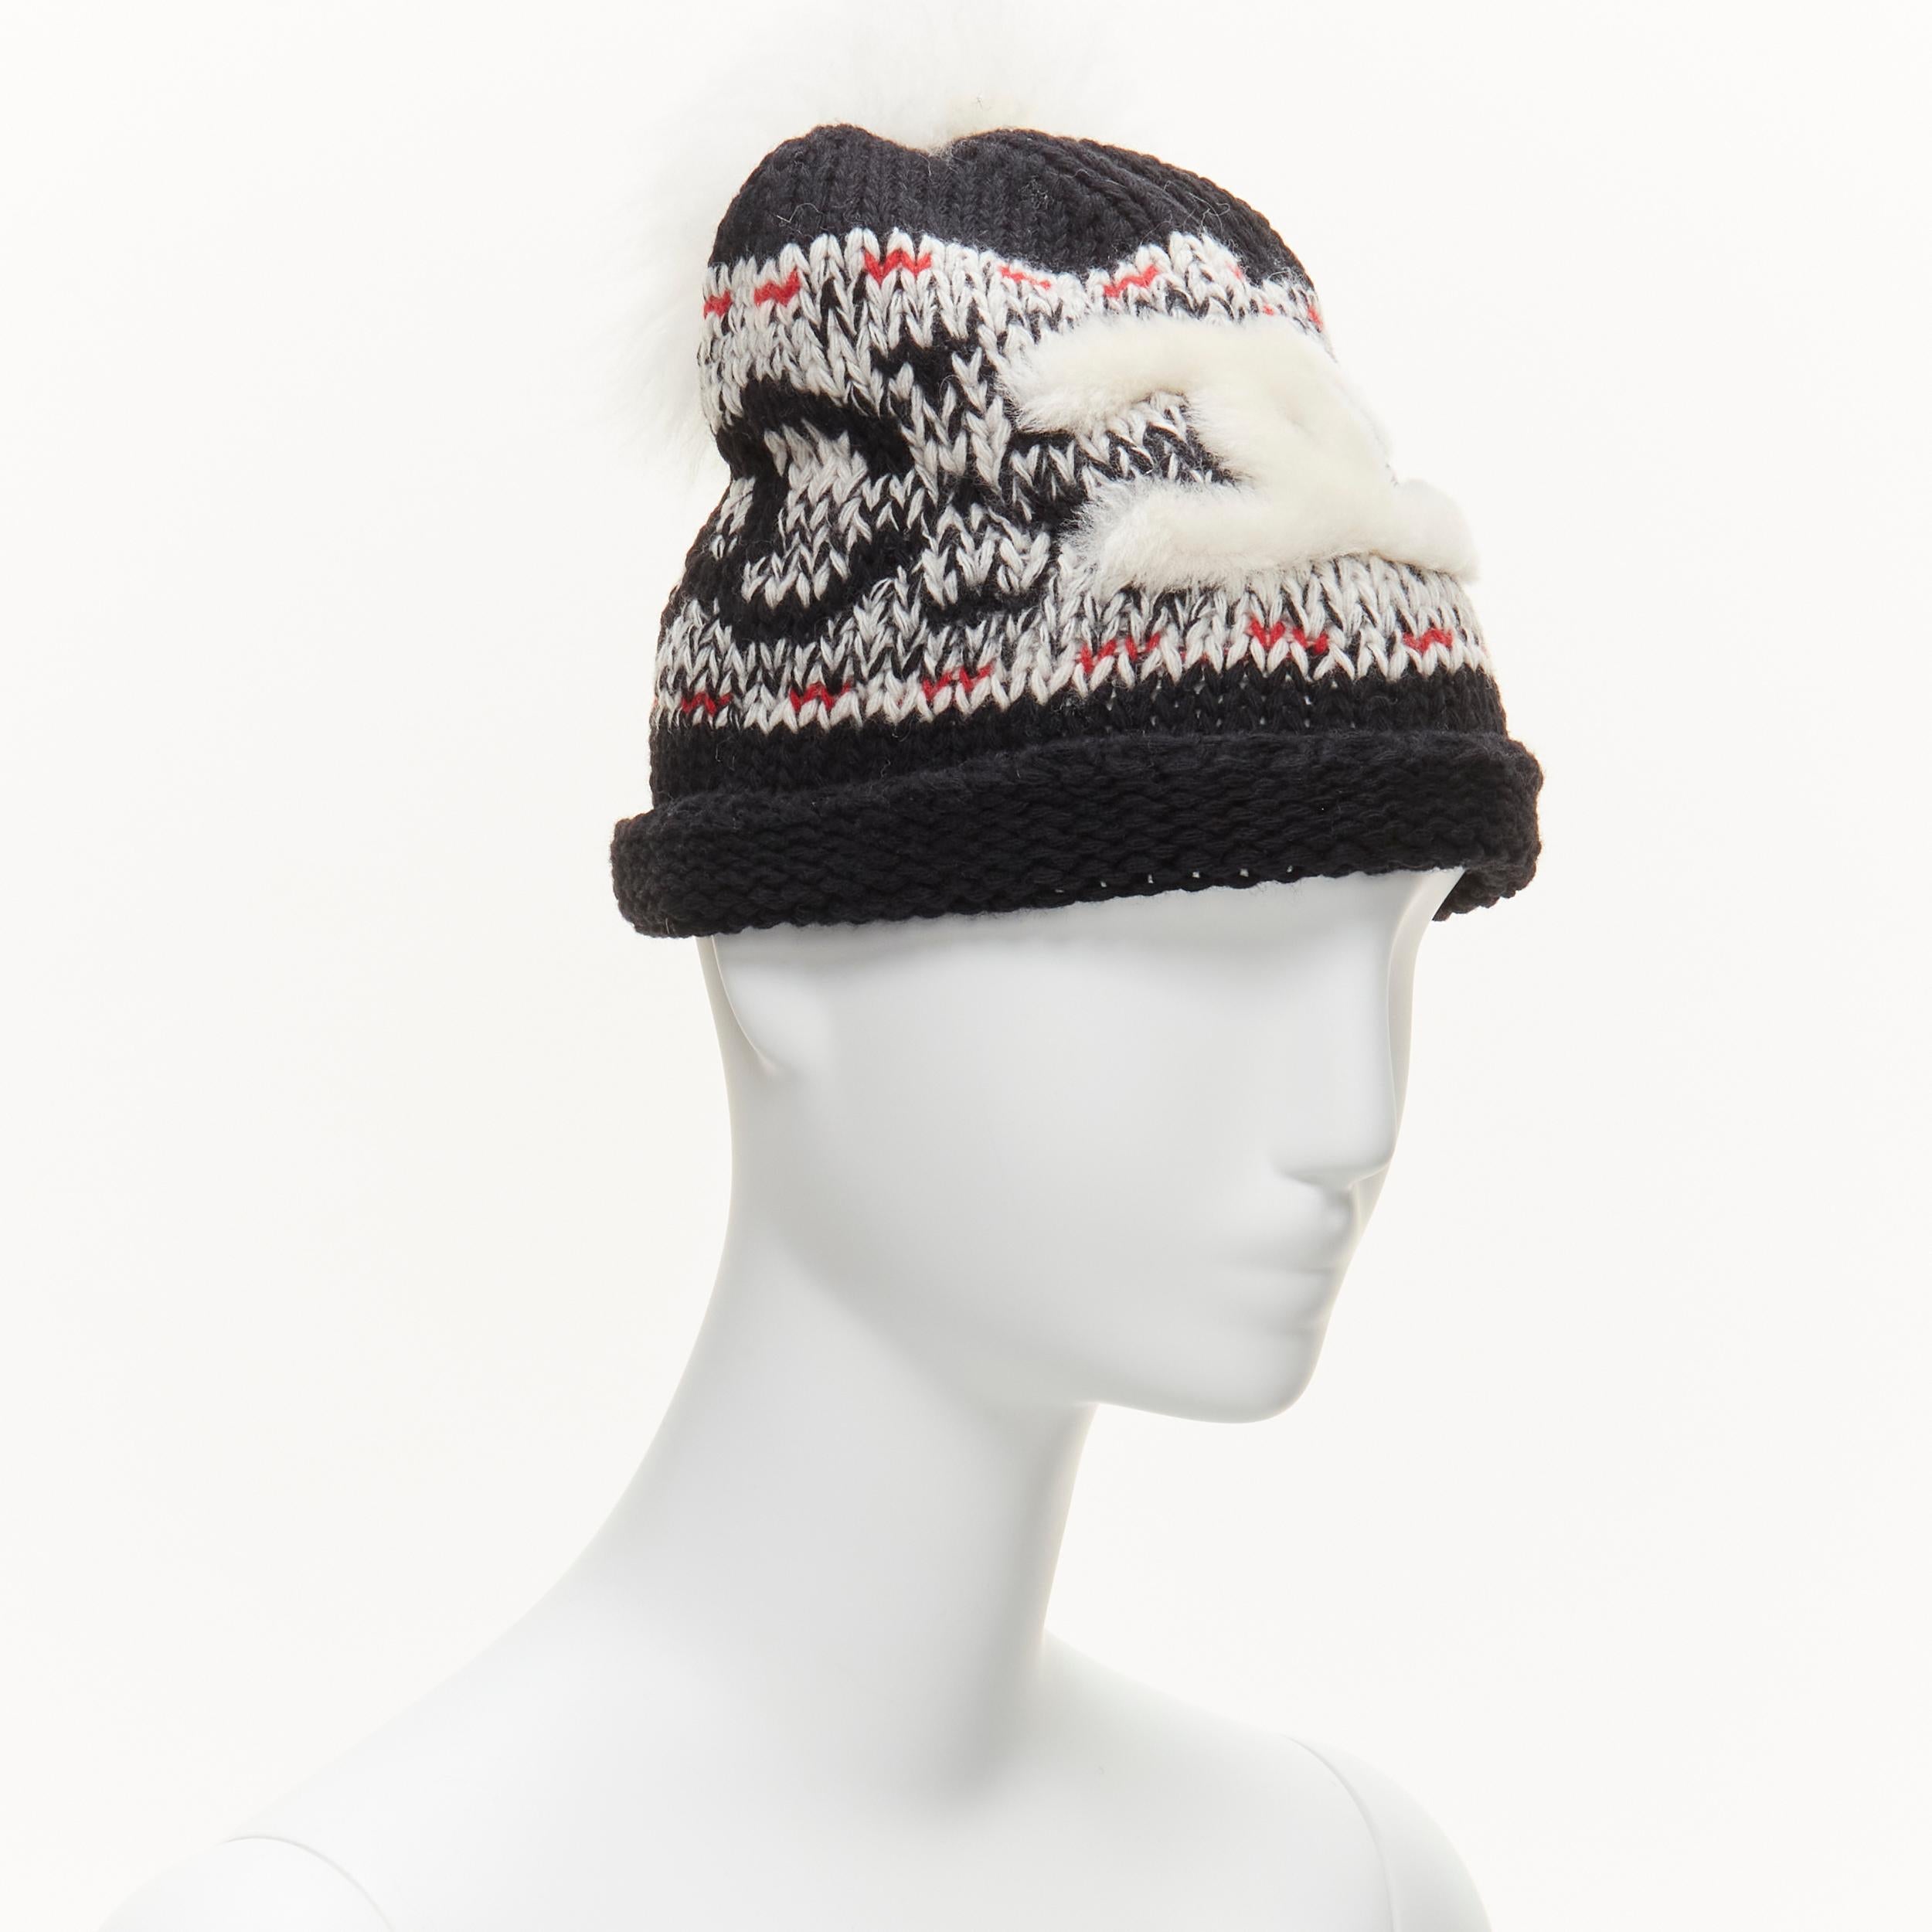 CHANEL 100% wool white CC logo pom pom black red intarsia beanie hat
Reference: TGAS/D00059
Brand: Chanel
Designer: Karl Lagerfeld
Material: Wool
Color: Black, White
Pattern: Logomania
Closure: Pullover
Extra Details: CC fur logo and CC intarsia